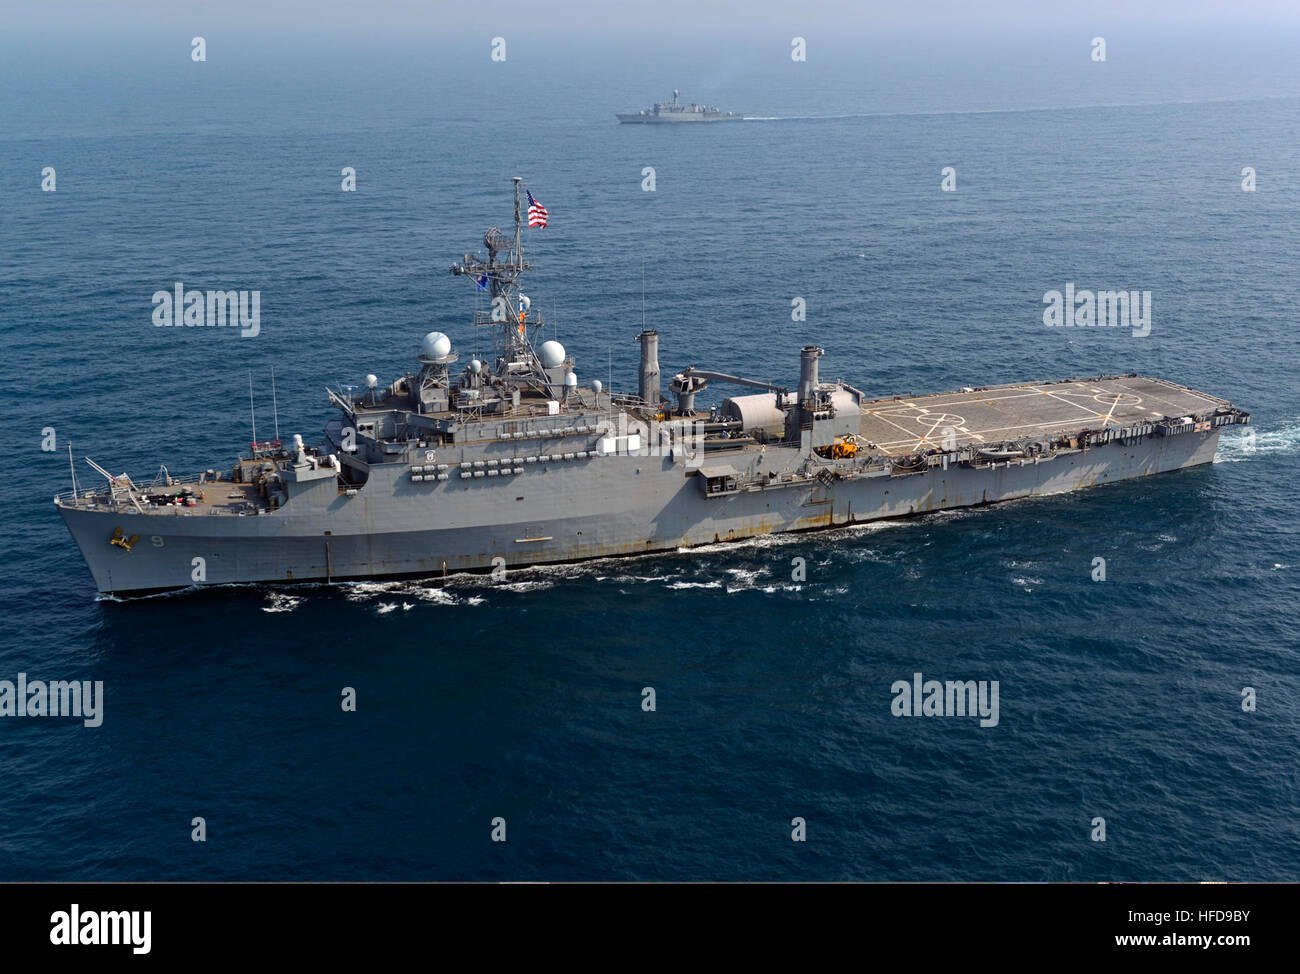 The amphibious transport dock ship USS Denver (LPD 9) and other ships assigned to the Bonhomme Richard Amphibious Ready Group are underway with Republic of Korea Navy ships during a photo exercise in the East China Sea March 27, 2014. The Denver was participating in exercise Ssang Yong 14, a combined U.S.-South Korean combat readiness and joint/combined interoperability exercise designed to advance South Korean command and control capabilities through amphibious operations. (U.S. Navy photo by Mass Communication Specialist 2nd Class Michael Achterling/Released) The amphibious transport dock sh Stock Photo